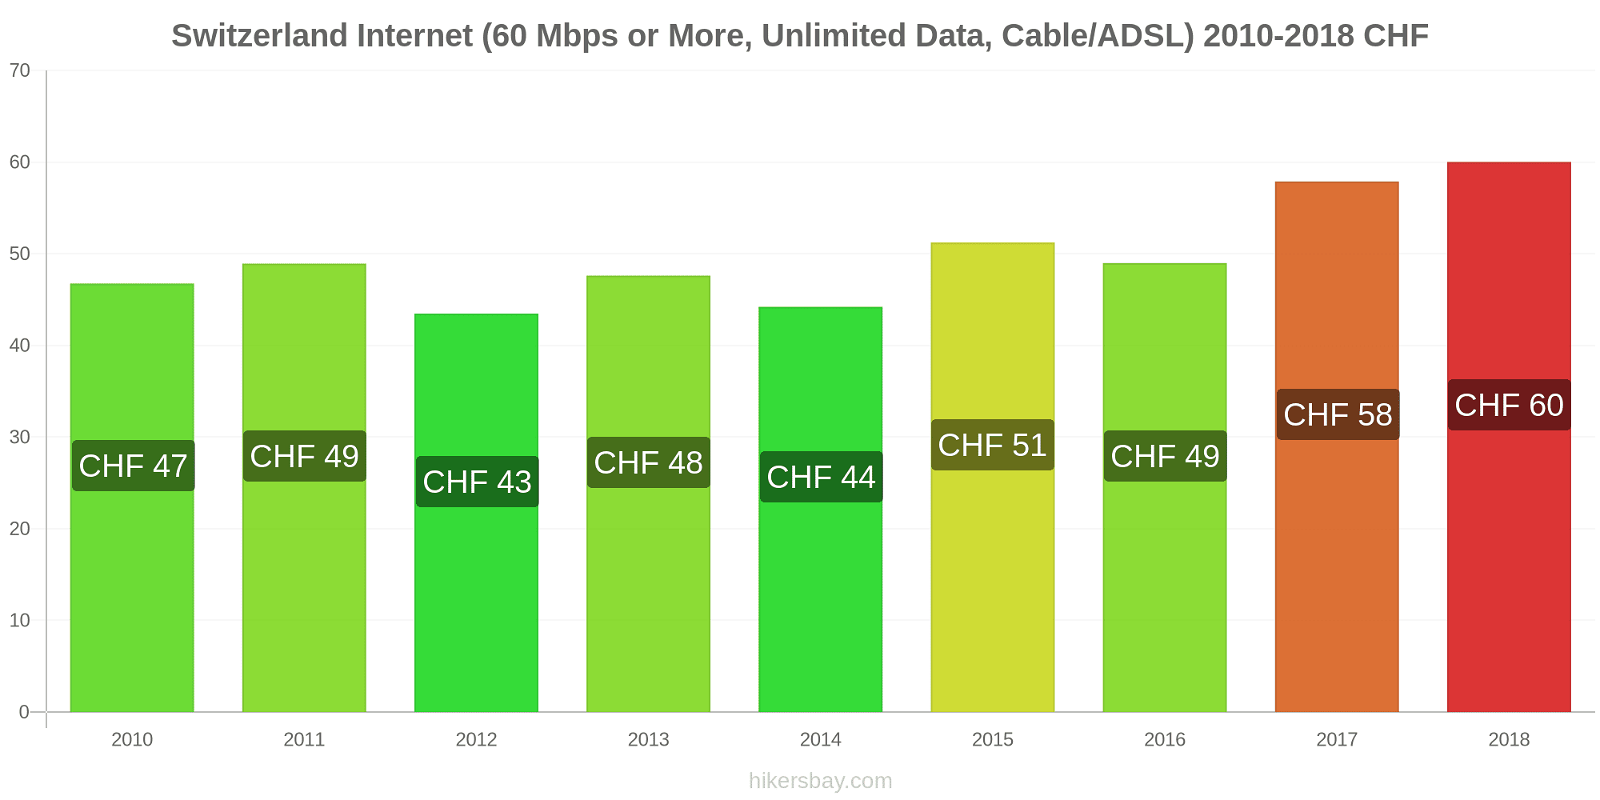 Switzerland price changes Internet (60 Mbps or more, unlimited data, cable/ADSL) hikersbay.com